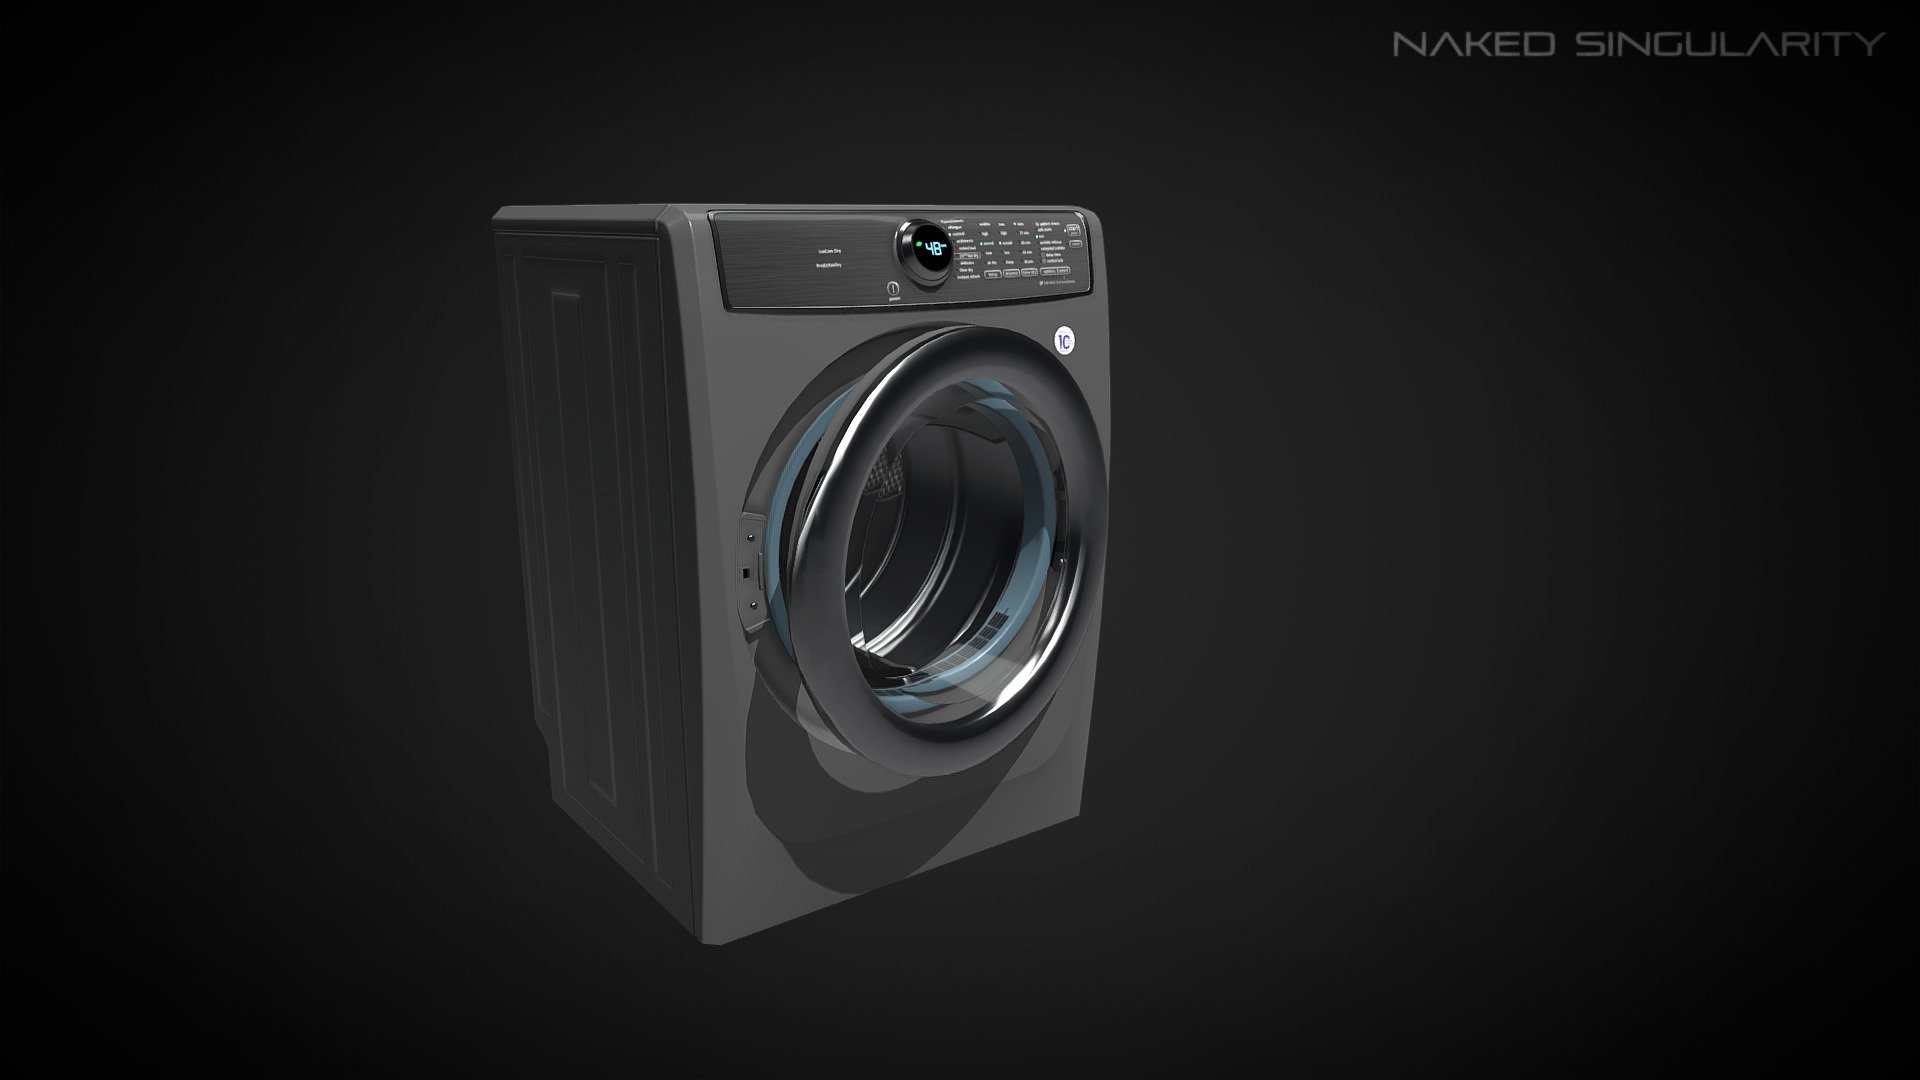 Dryer Laundry | Appliance / Electronic Lowpoly




High quality lowpoly model.

Parts are seperated so you can create animation in your 3d software.

4K texture.

UV channel 2 unwrapped (for lightmap in Unity, Unreal Engine)

Note: The animations are included but for previewing mainly.

Check out other appliance electronic models here

Customer support: nakedsingularity.studio@gmail.com

Youtube

Facebook - Dryer Laundry | Appliance / Electronic - Buy Royalty Free 3D model by Naked Singularity Studio (@nakedsingularity) 3d model